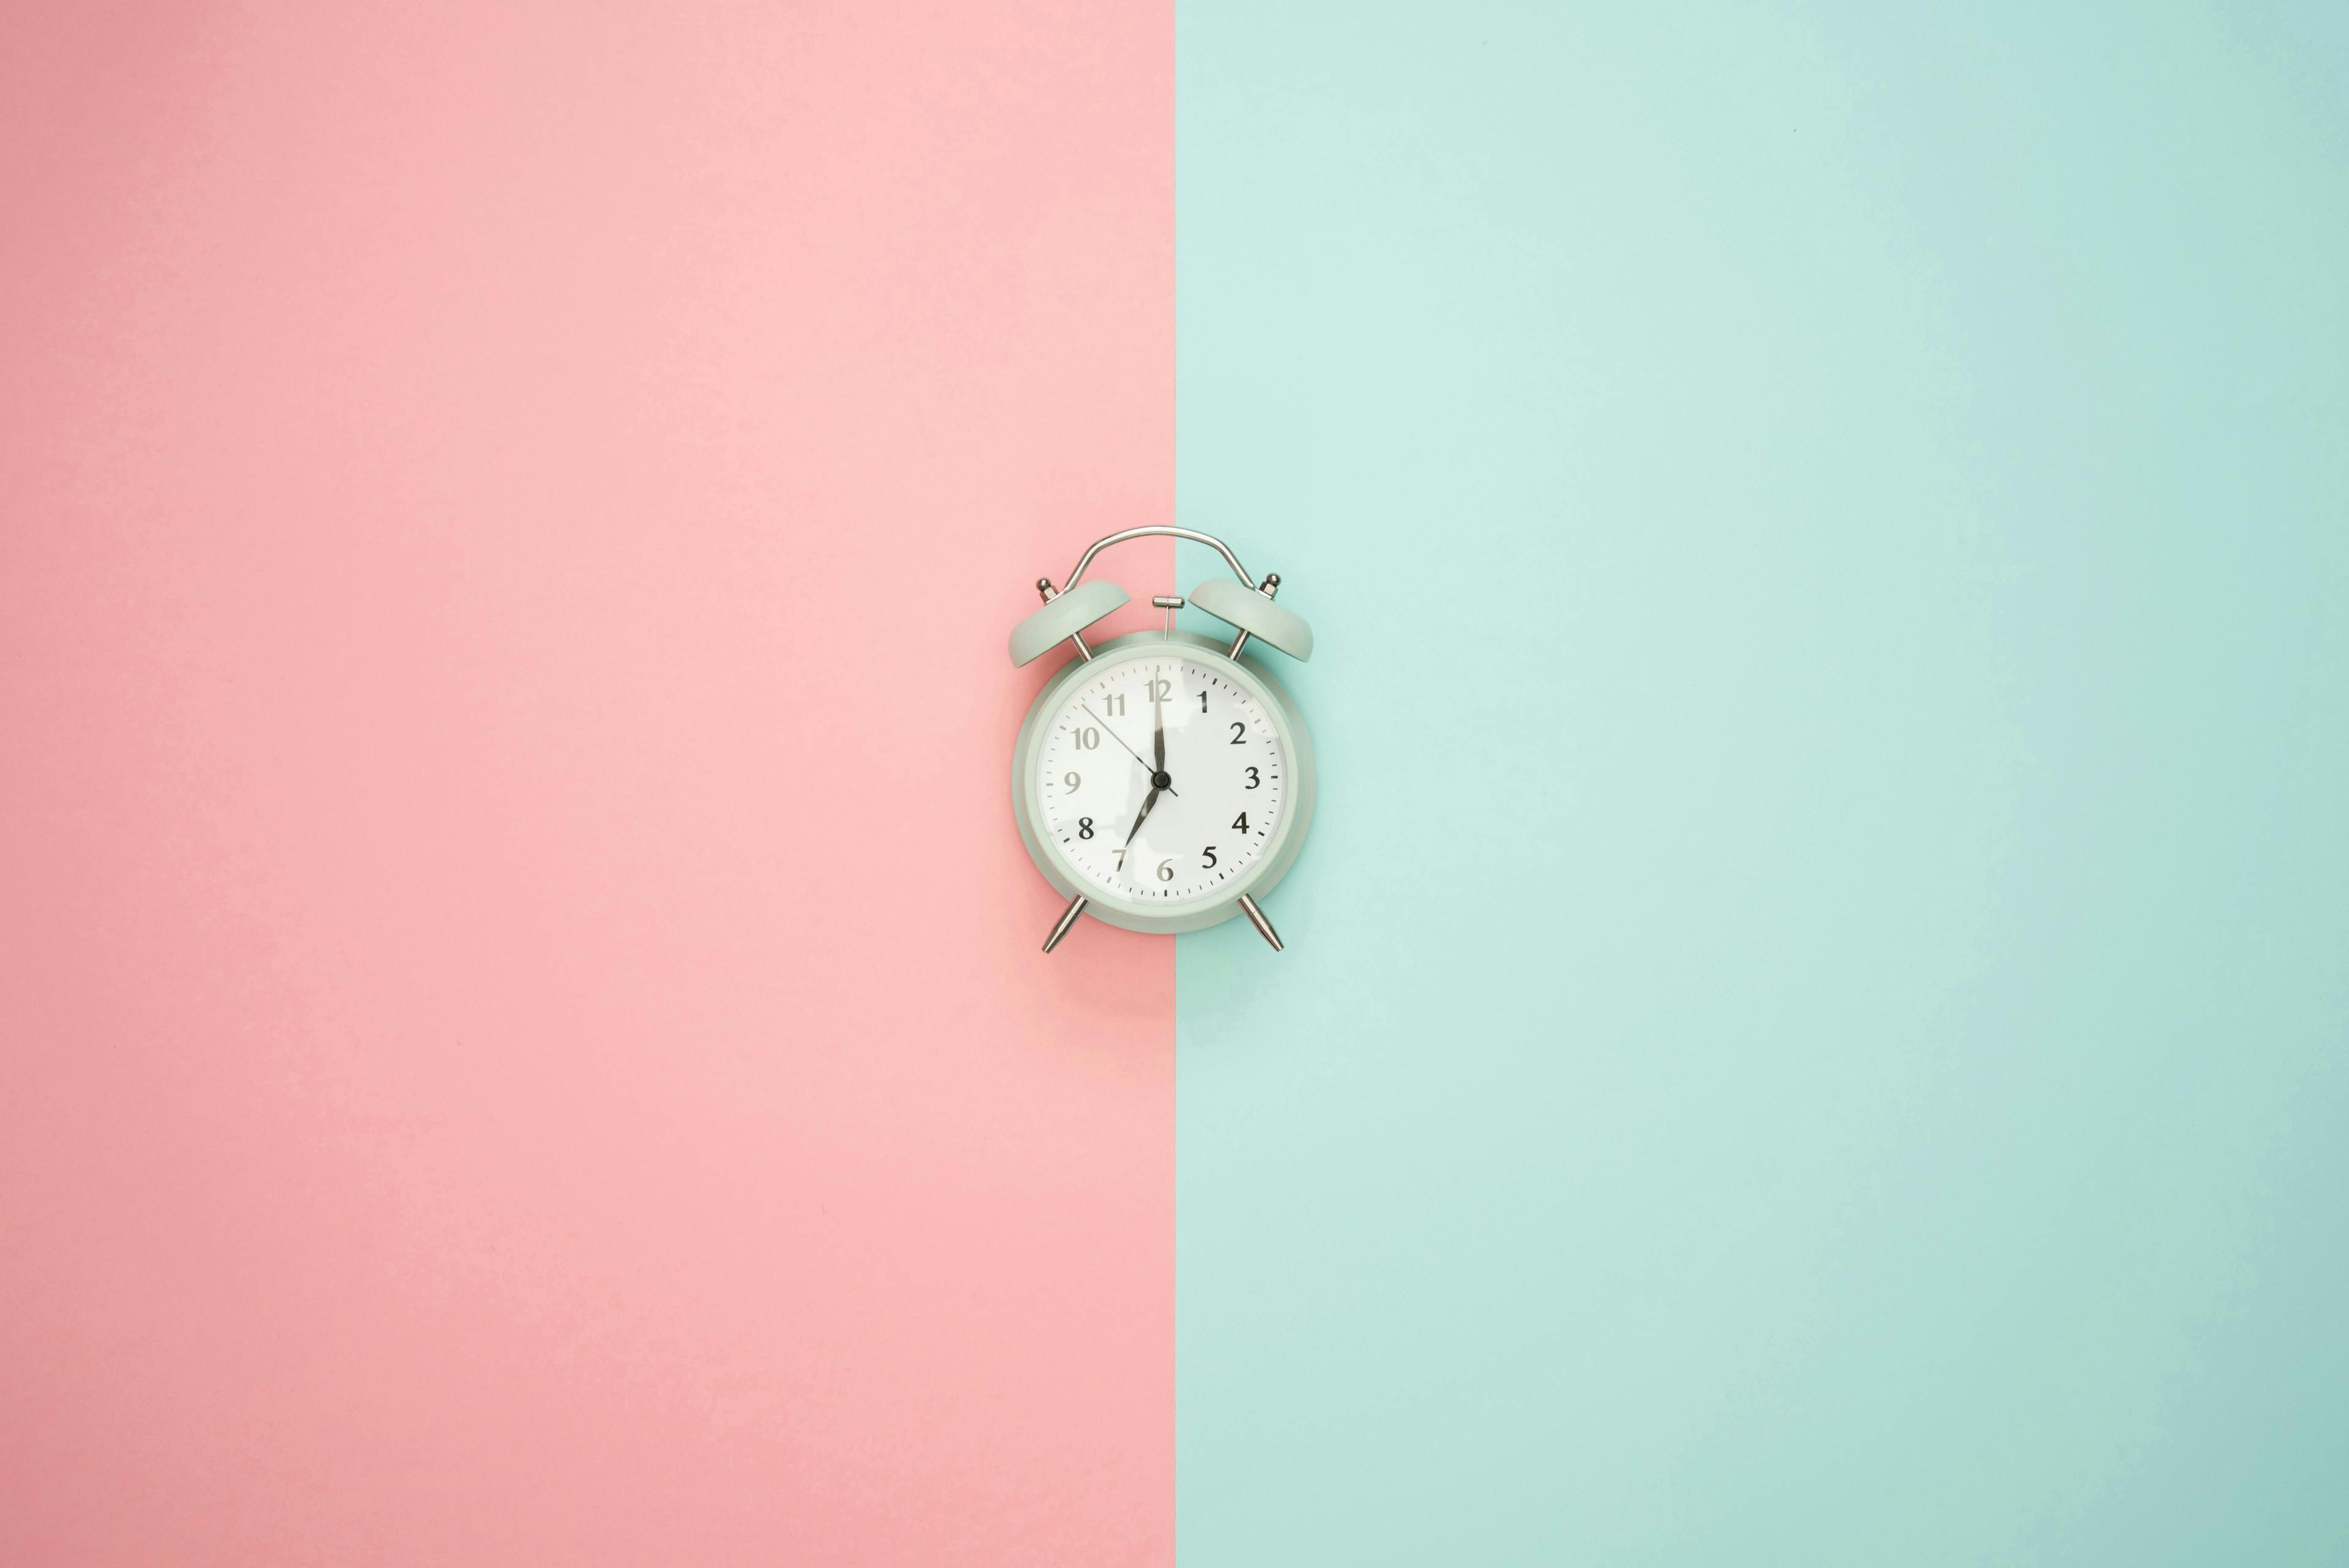 Techniques to Improve Time Management for Work